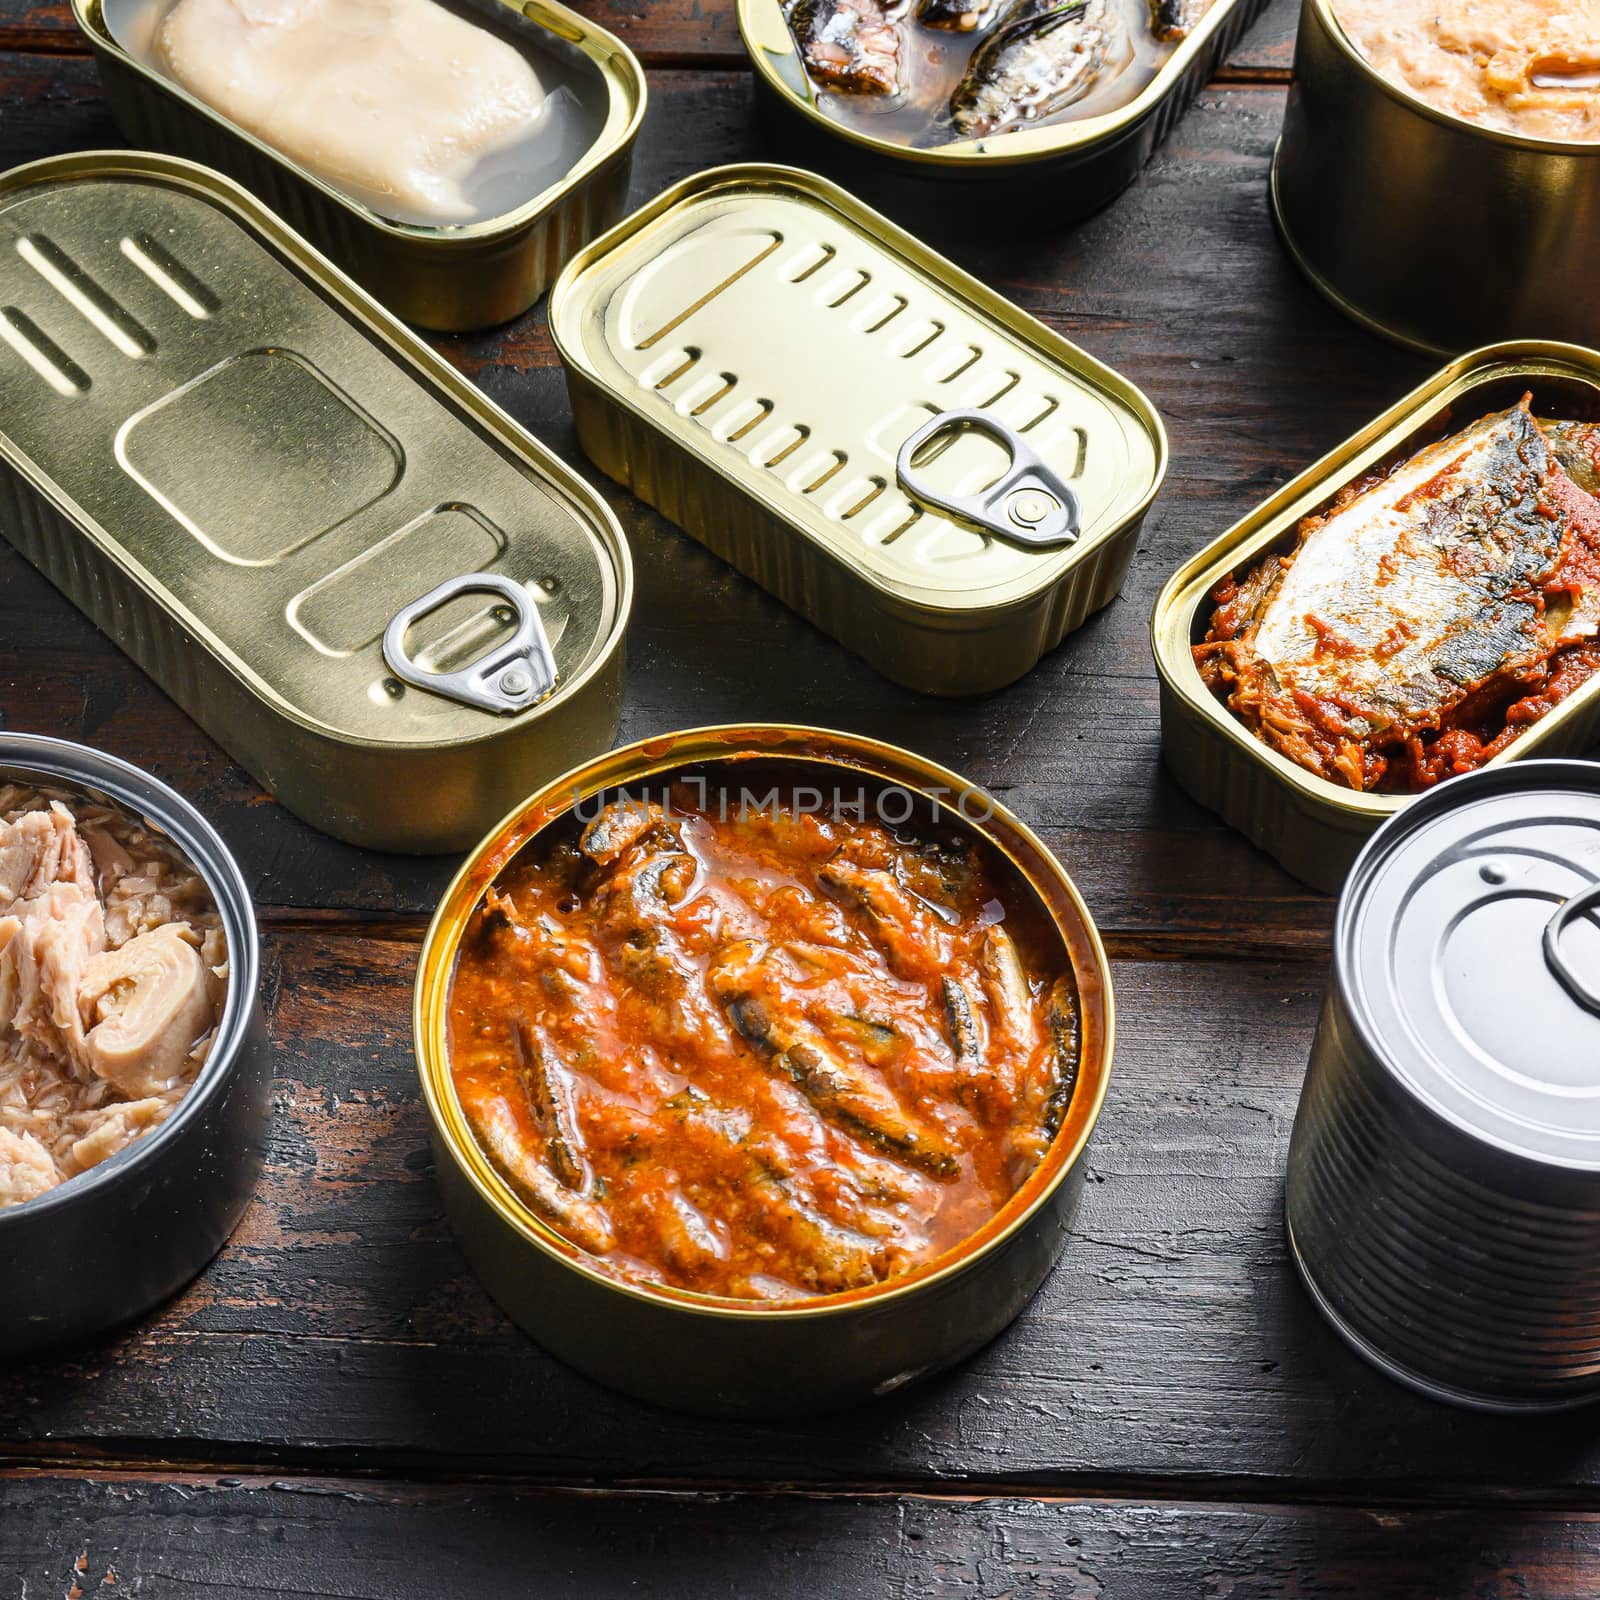 Conserves of canned fish with different types of seafood, opened and closed cans with Saury, mackerel, sprats, sardines, pilchard, squid, tuna, over dark wood old table side view, square.